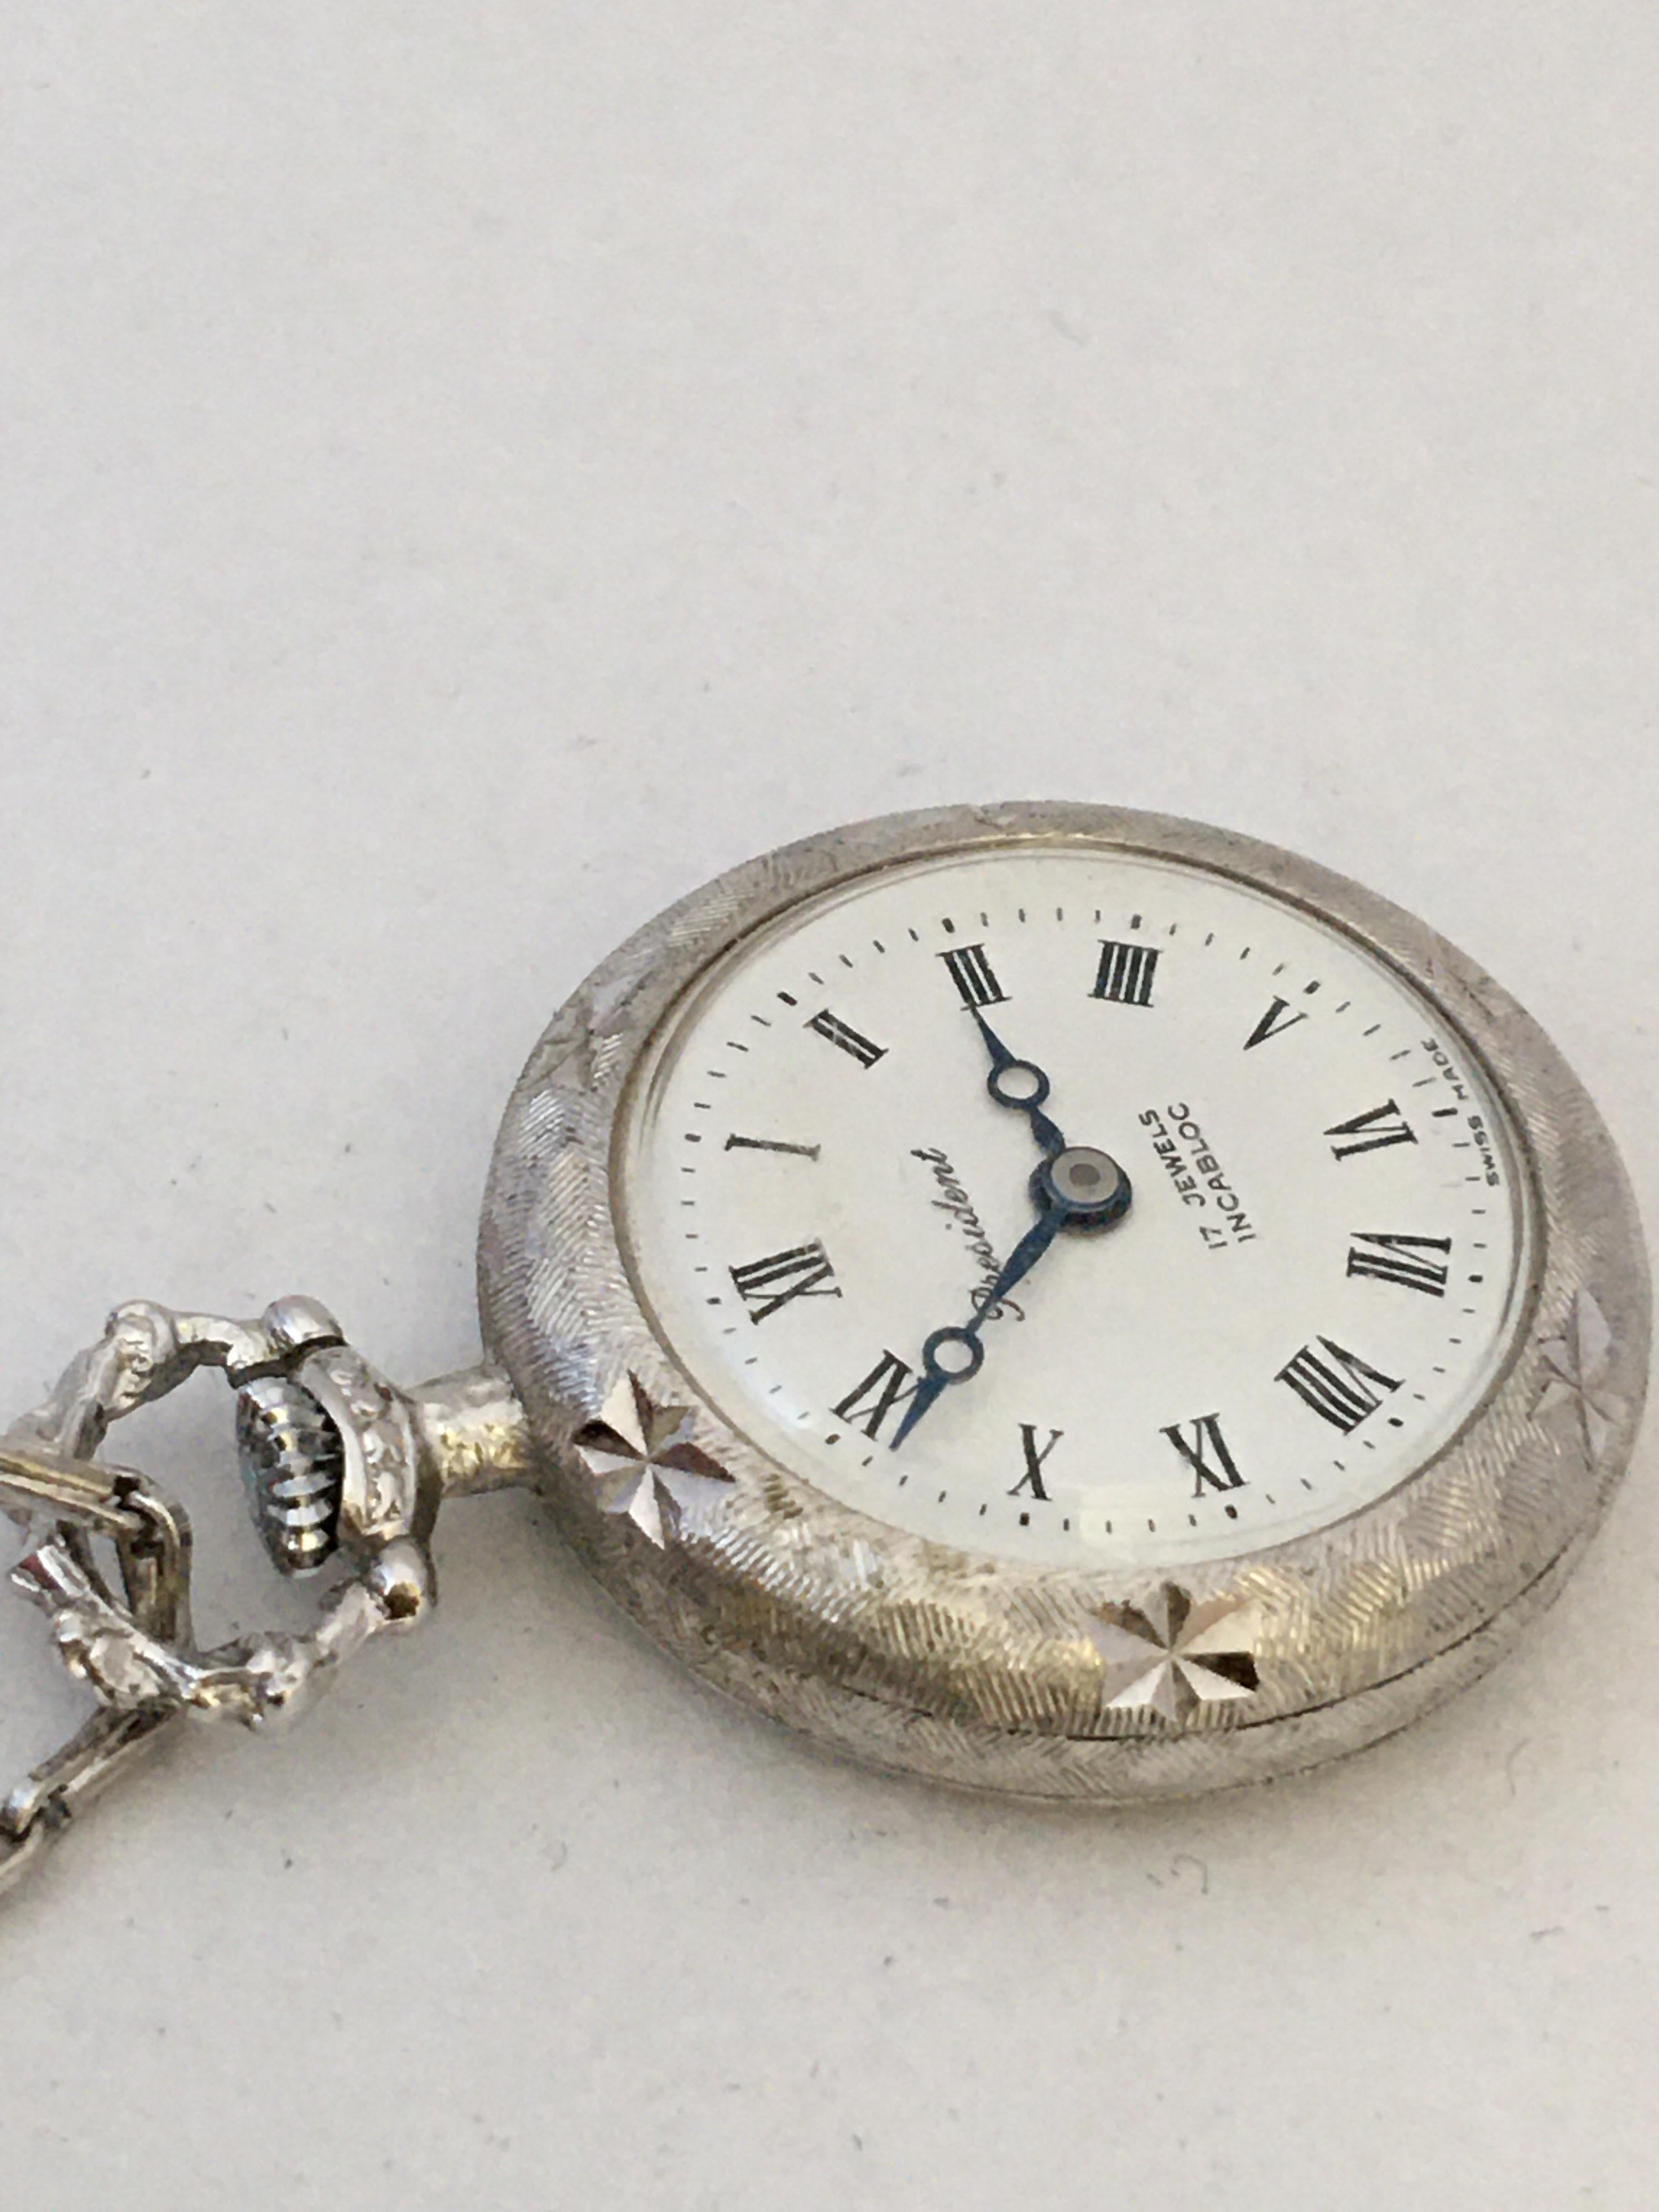 Vintage 1960s Hand-Winding Silver Plated Engraved Pendant Watch 2